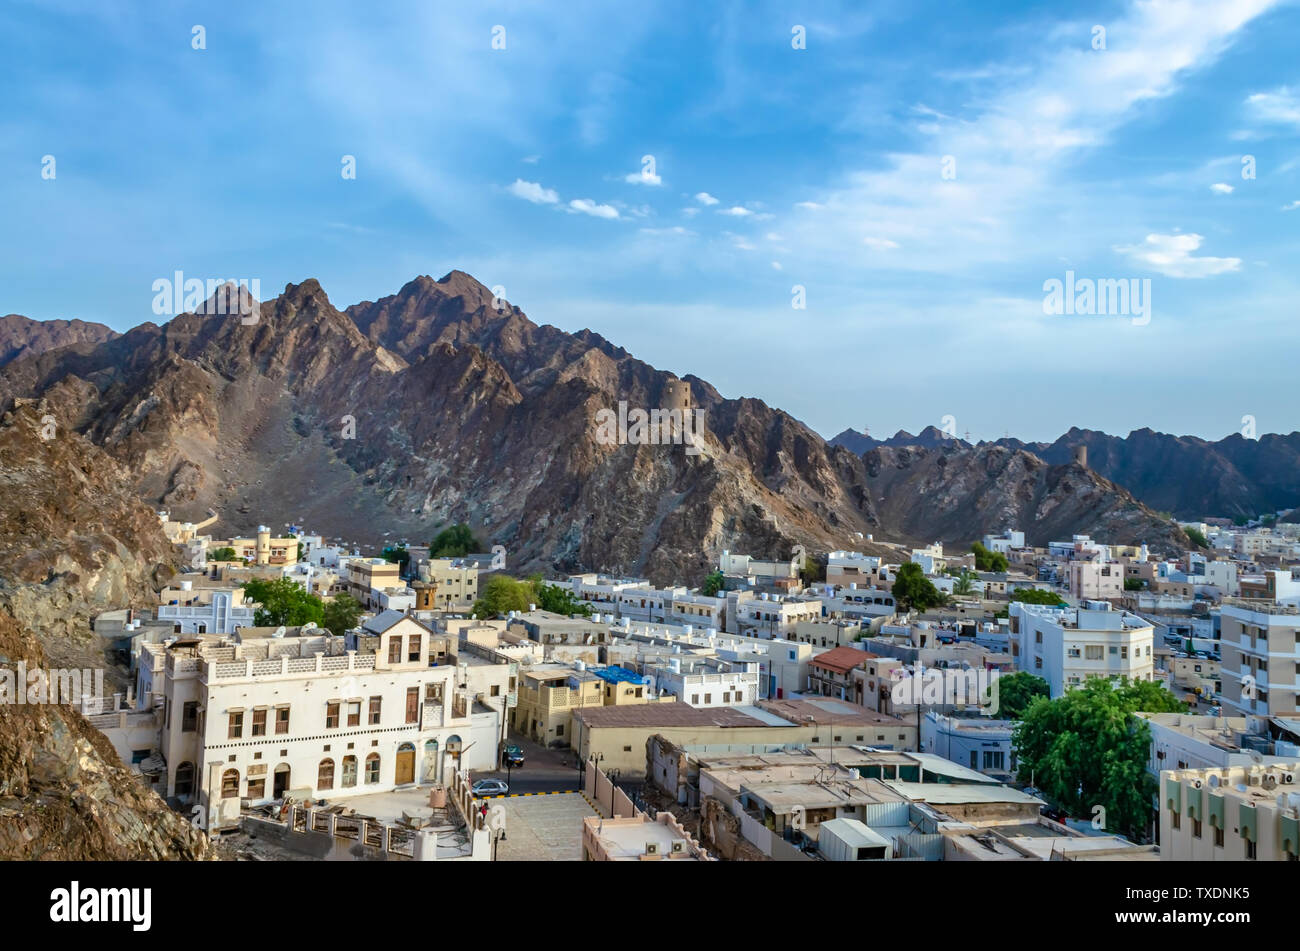 Old houses in a small town at the foot of a hill with watchtowers. From Muscat, Oman. Stock Photo